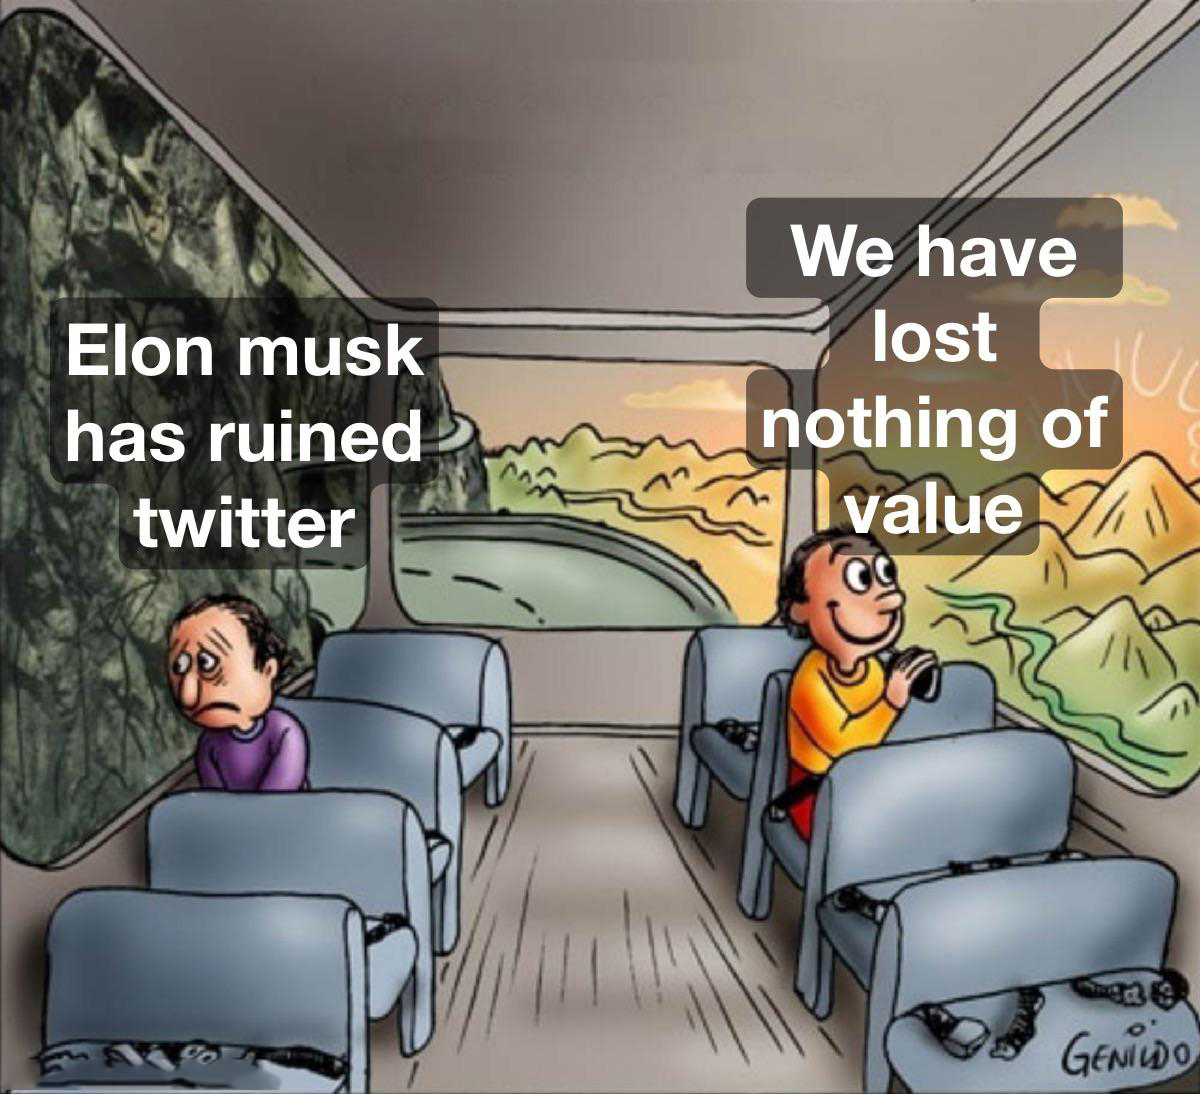 daily dose of memes - life is not that serious - Elon musk has ruined twitter We have lost nothing of value Genildo